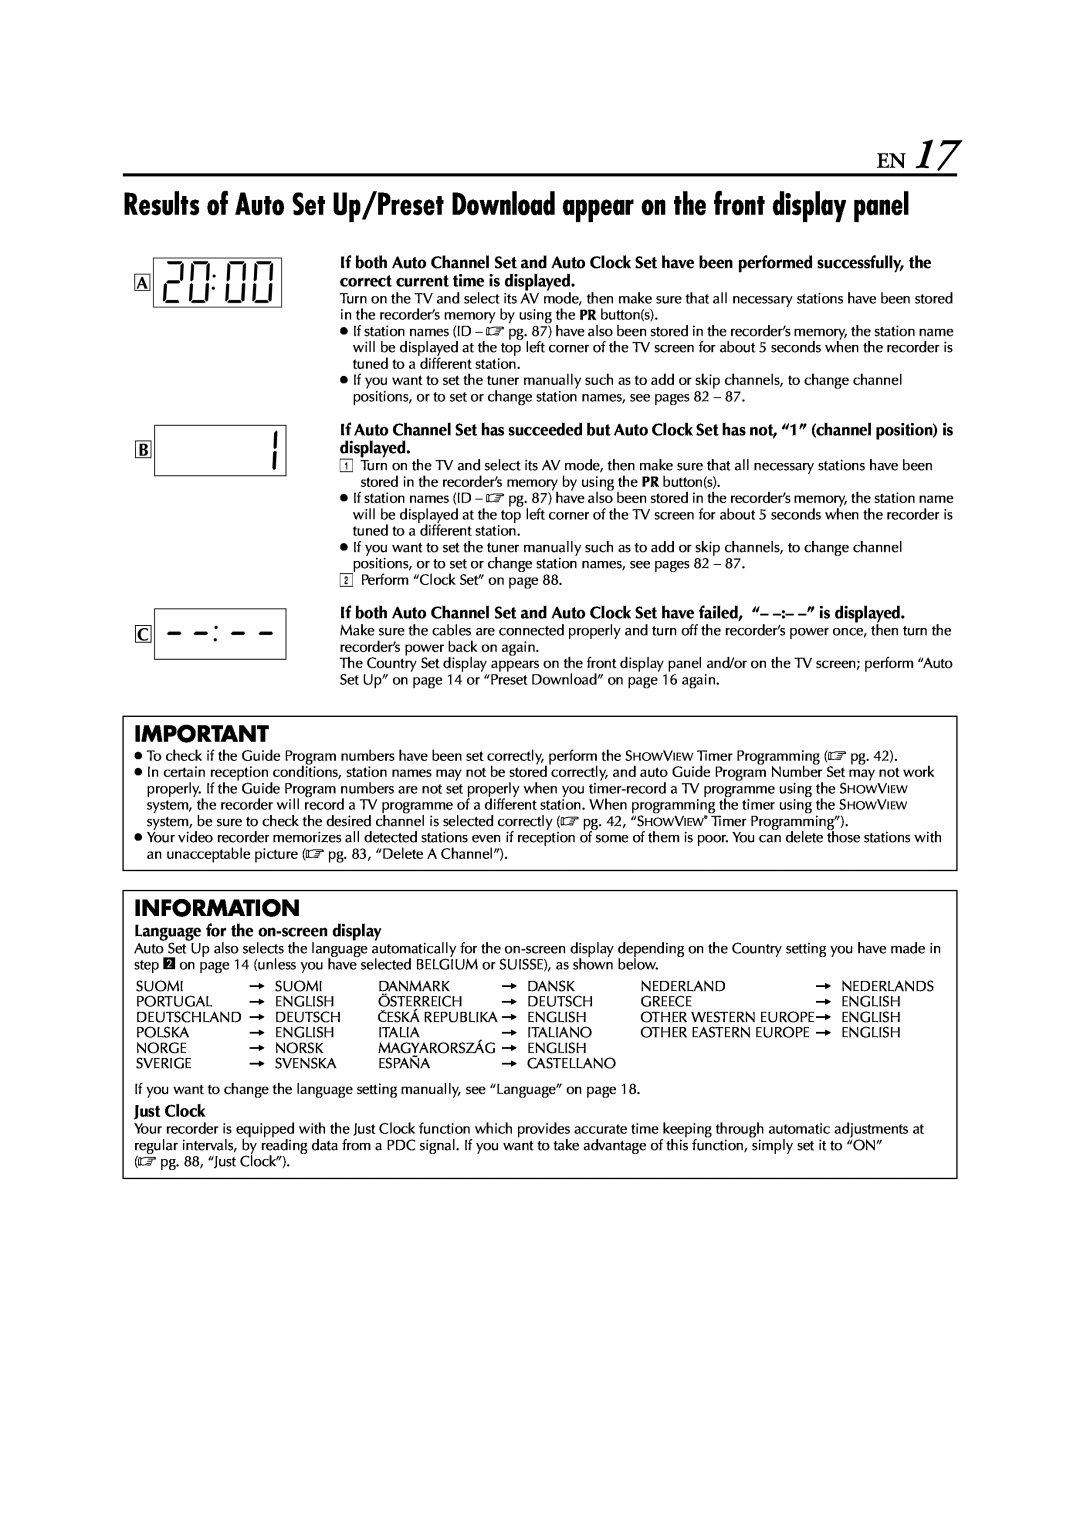 JVC HM-HDS1EU specifications Information, Language for the on-screen display, Just Clock 